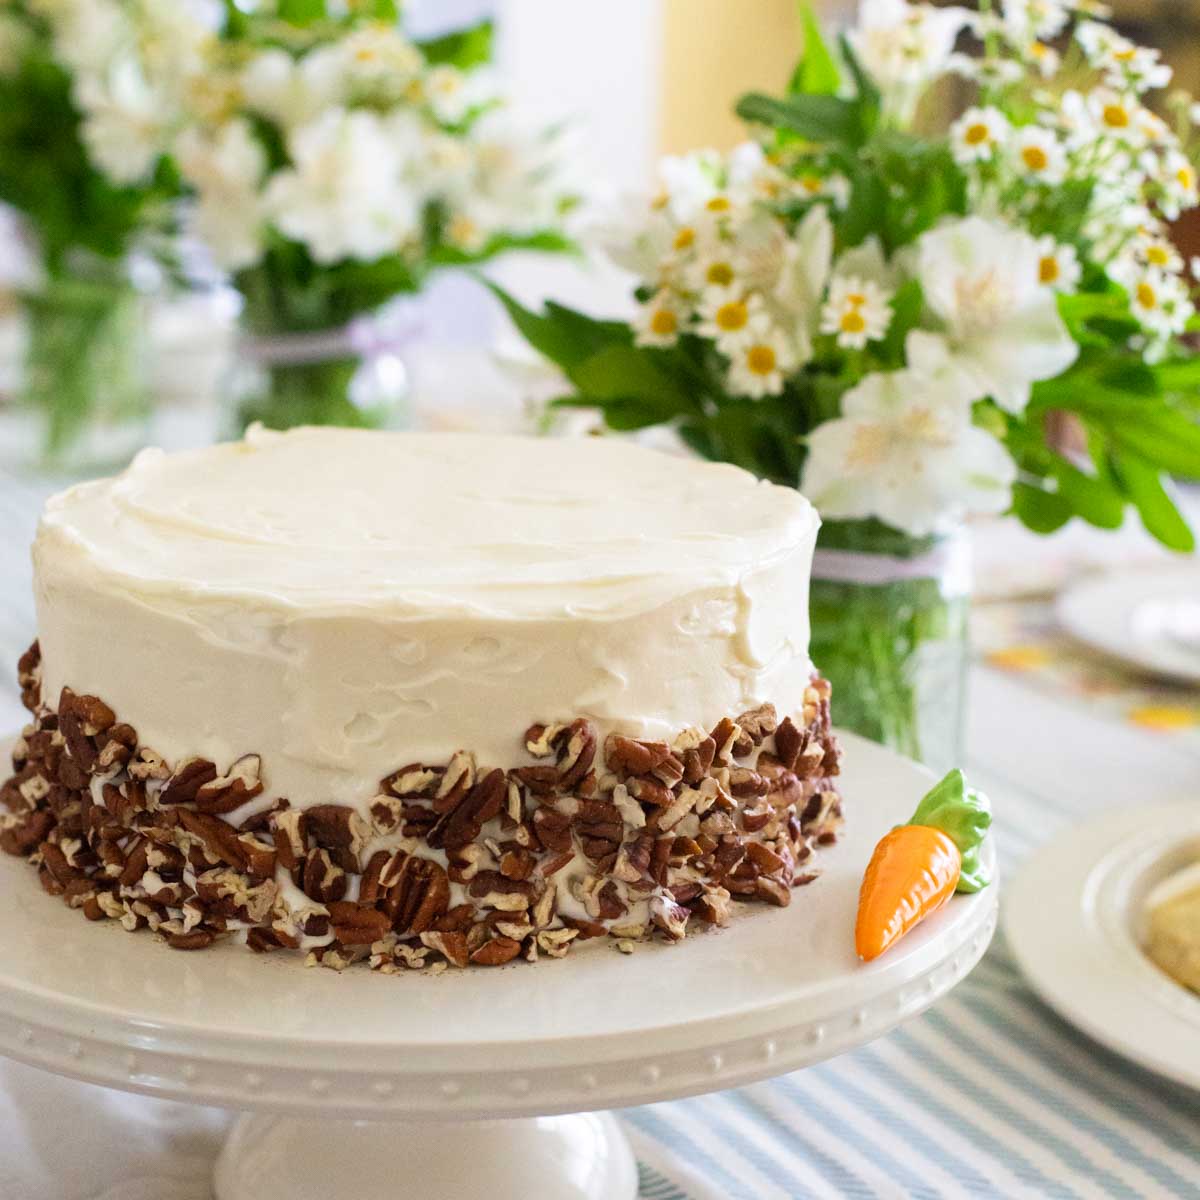 A gorgeous carrot cake with pecans on a cake platter next to bouquets of fresh flowers.